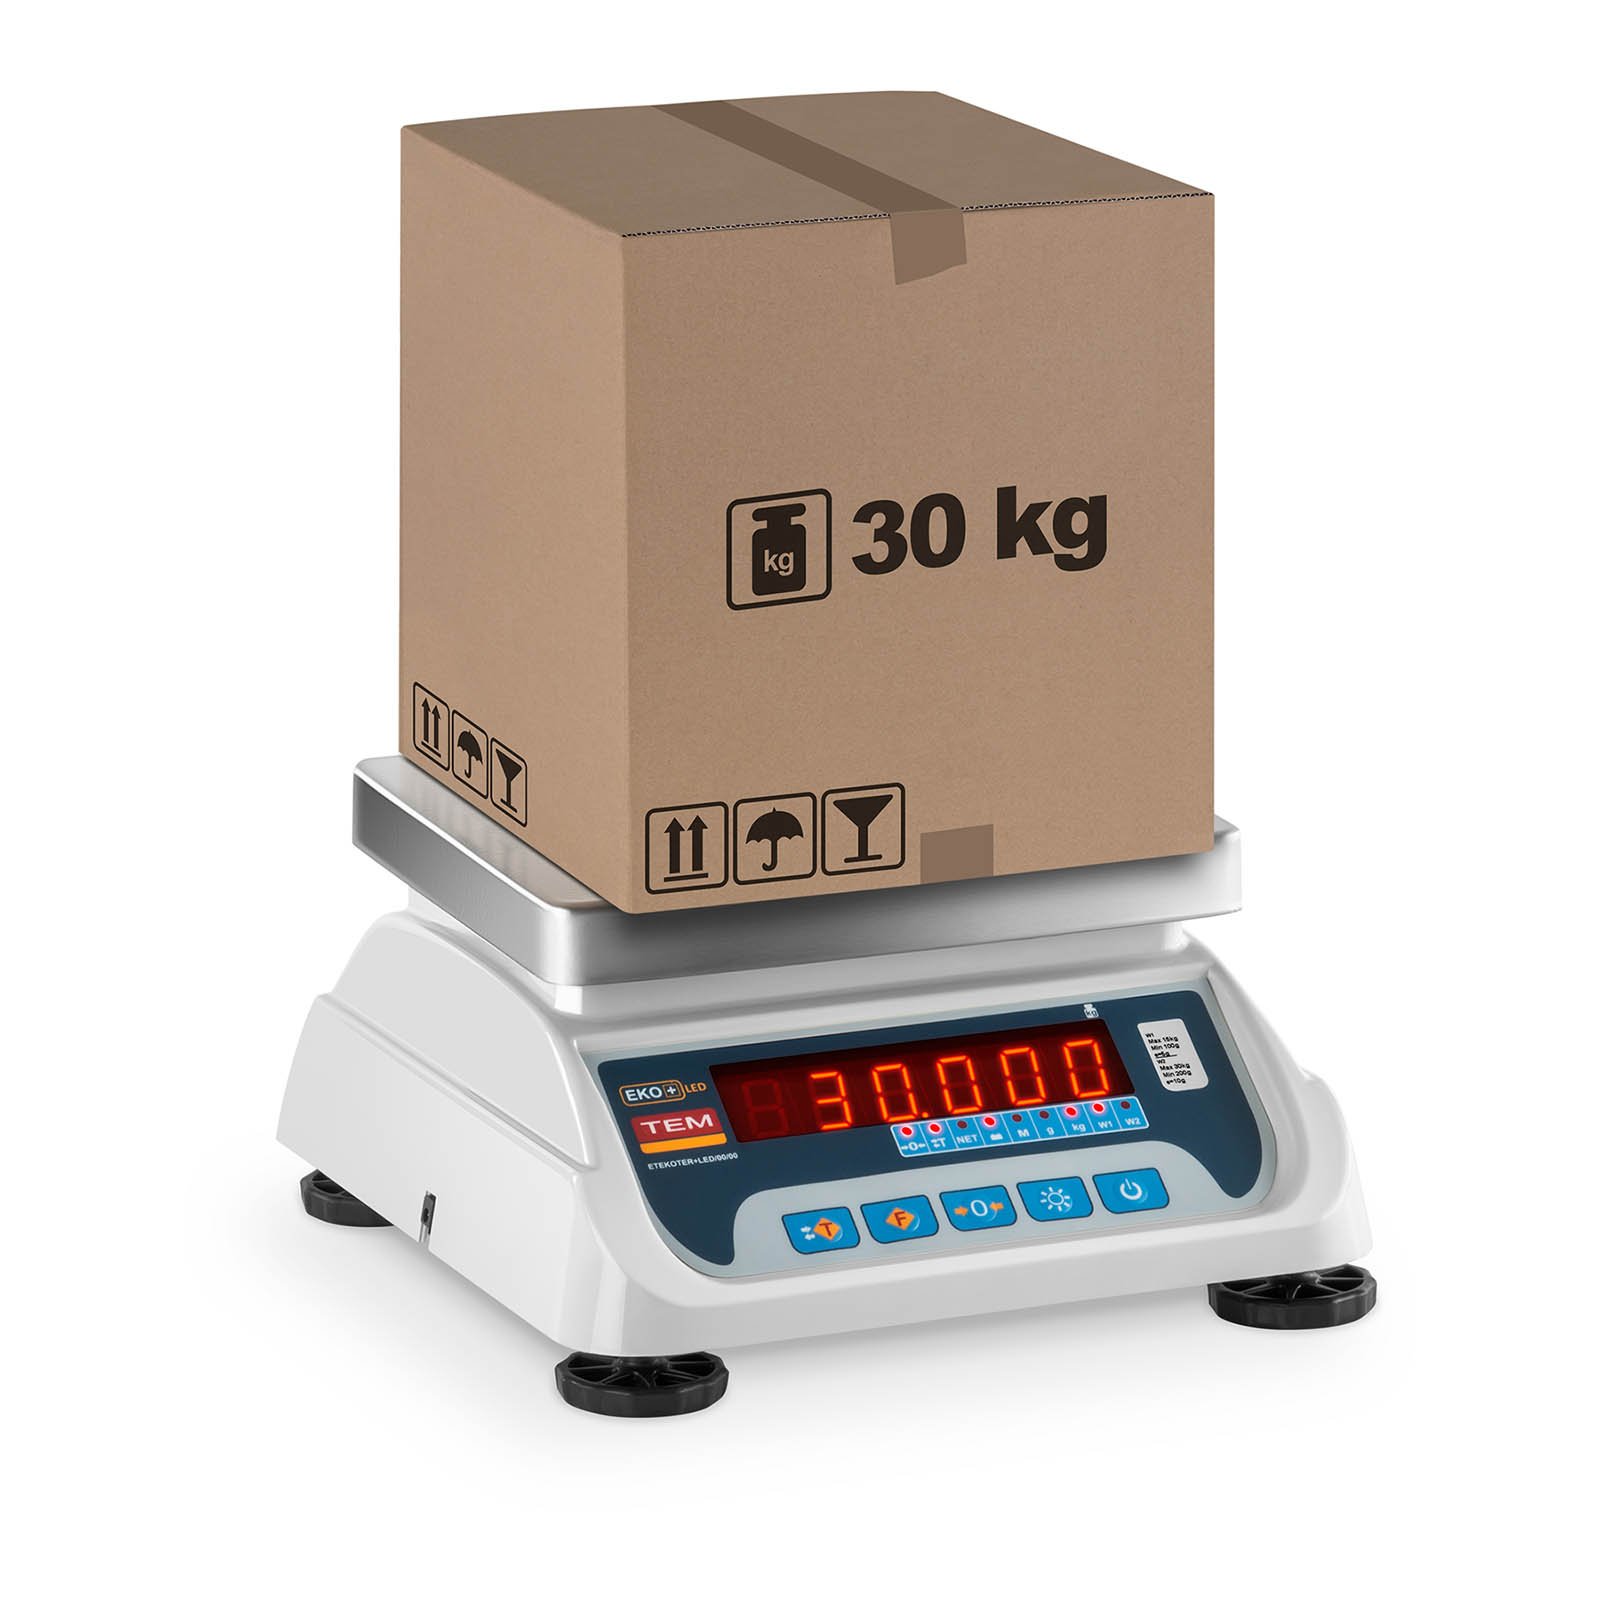 Table Scale - calibrated - 15 kg / 5g - 30 kg / 10 g - LED